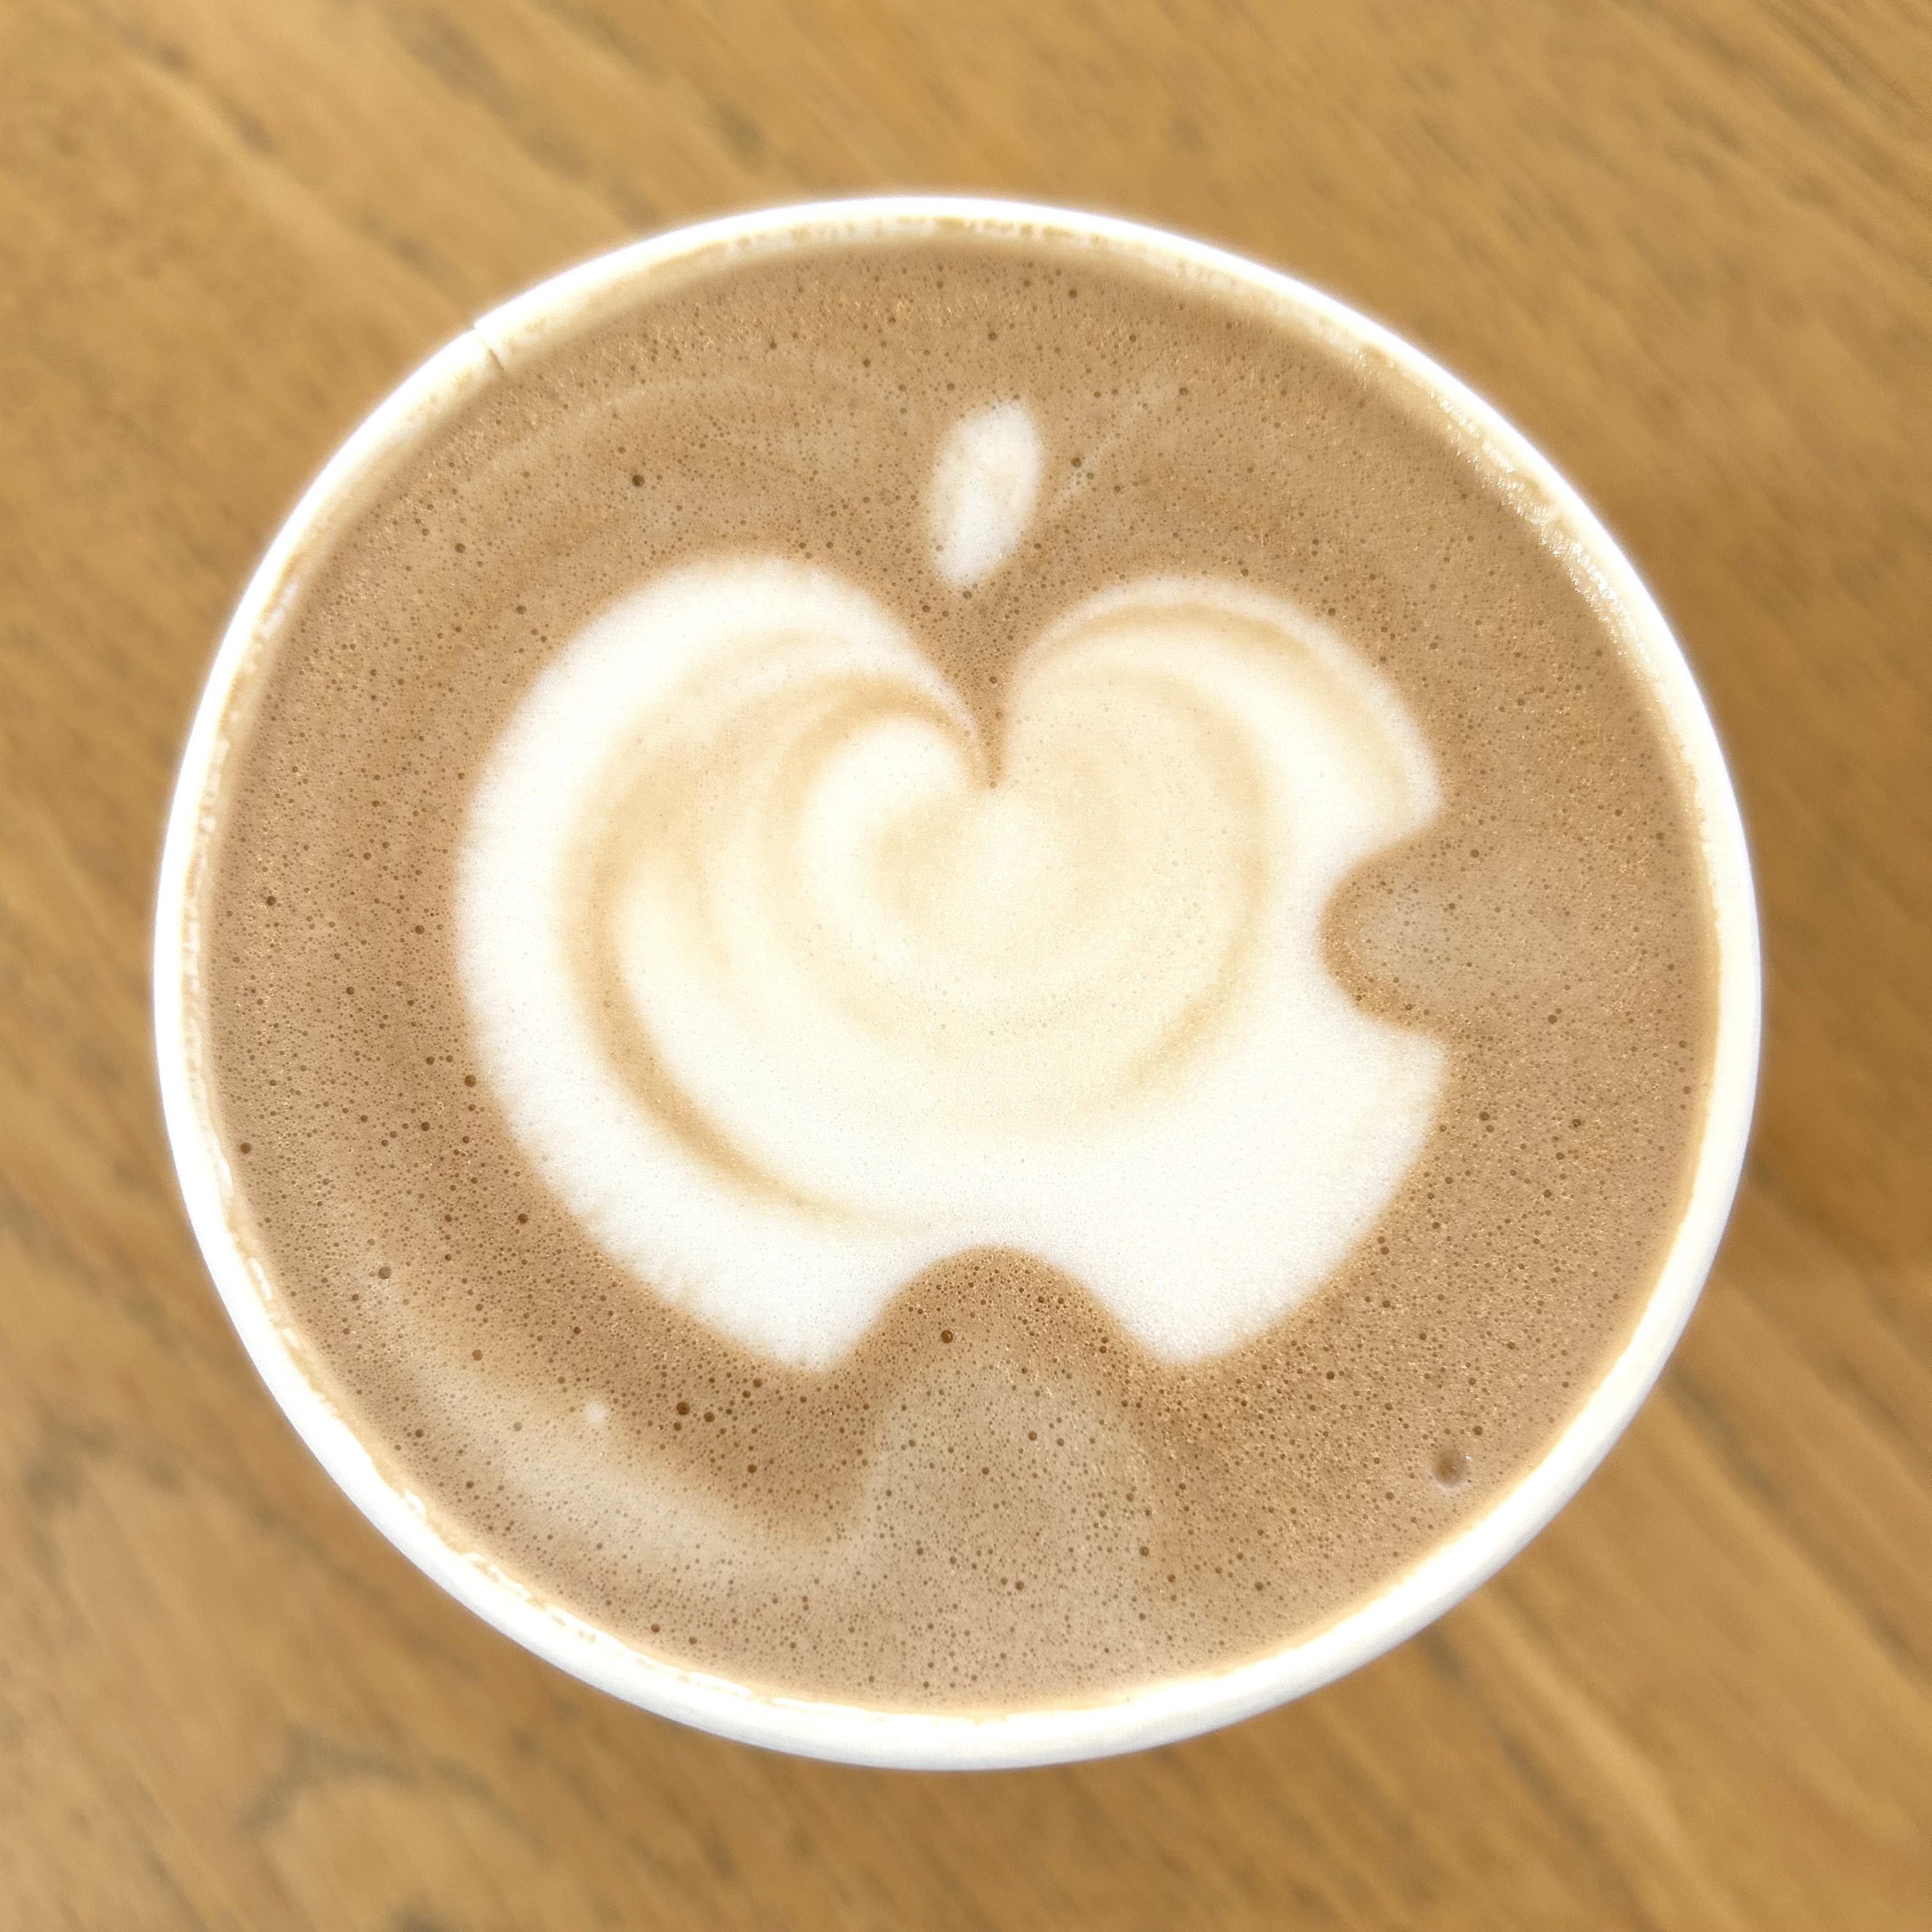 View from overhead of a latte with the Apple logo created with foam art.